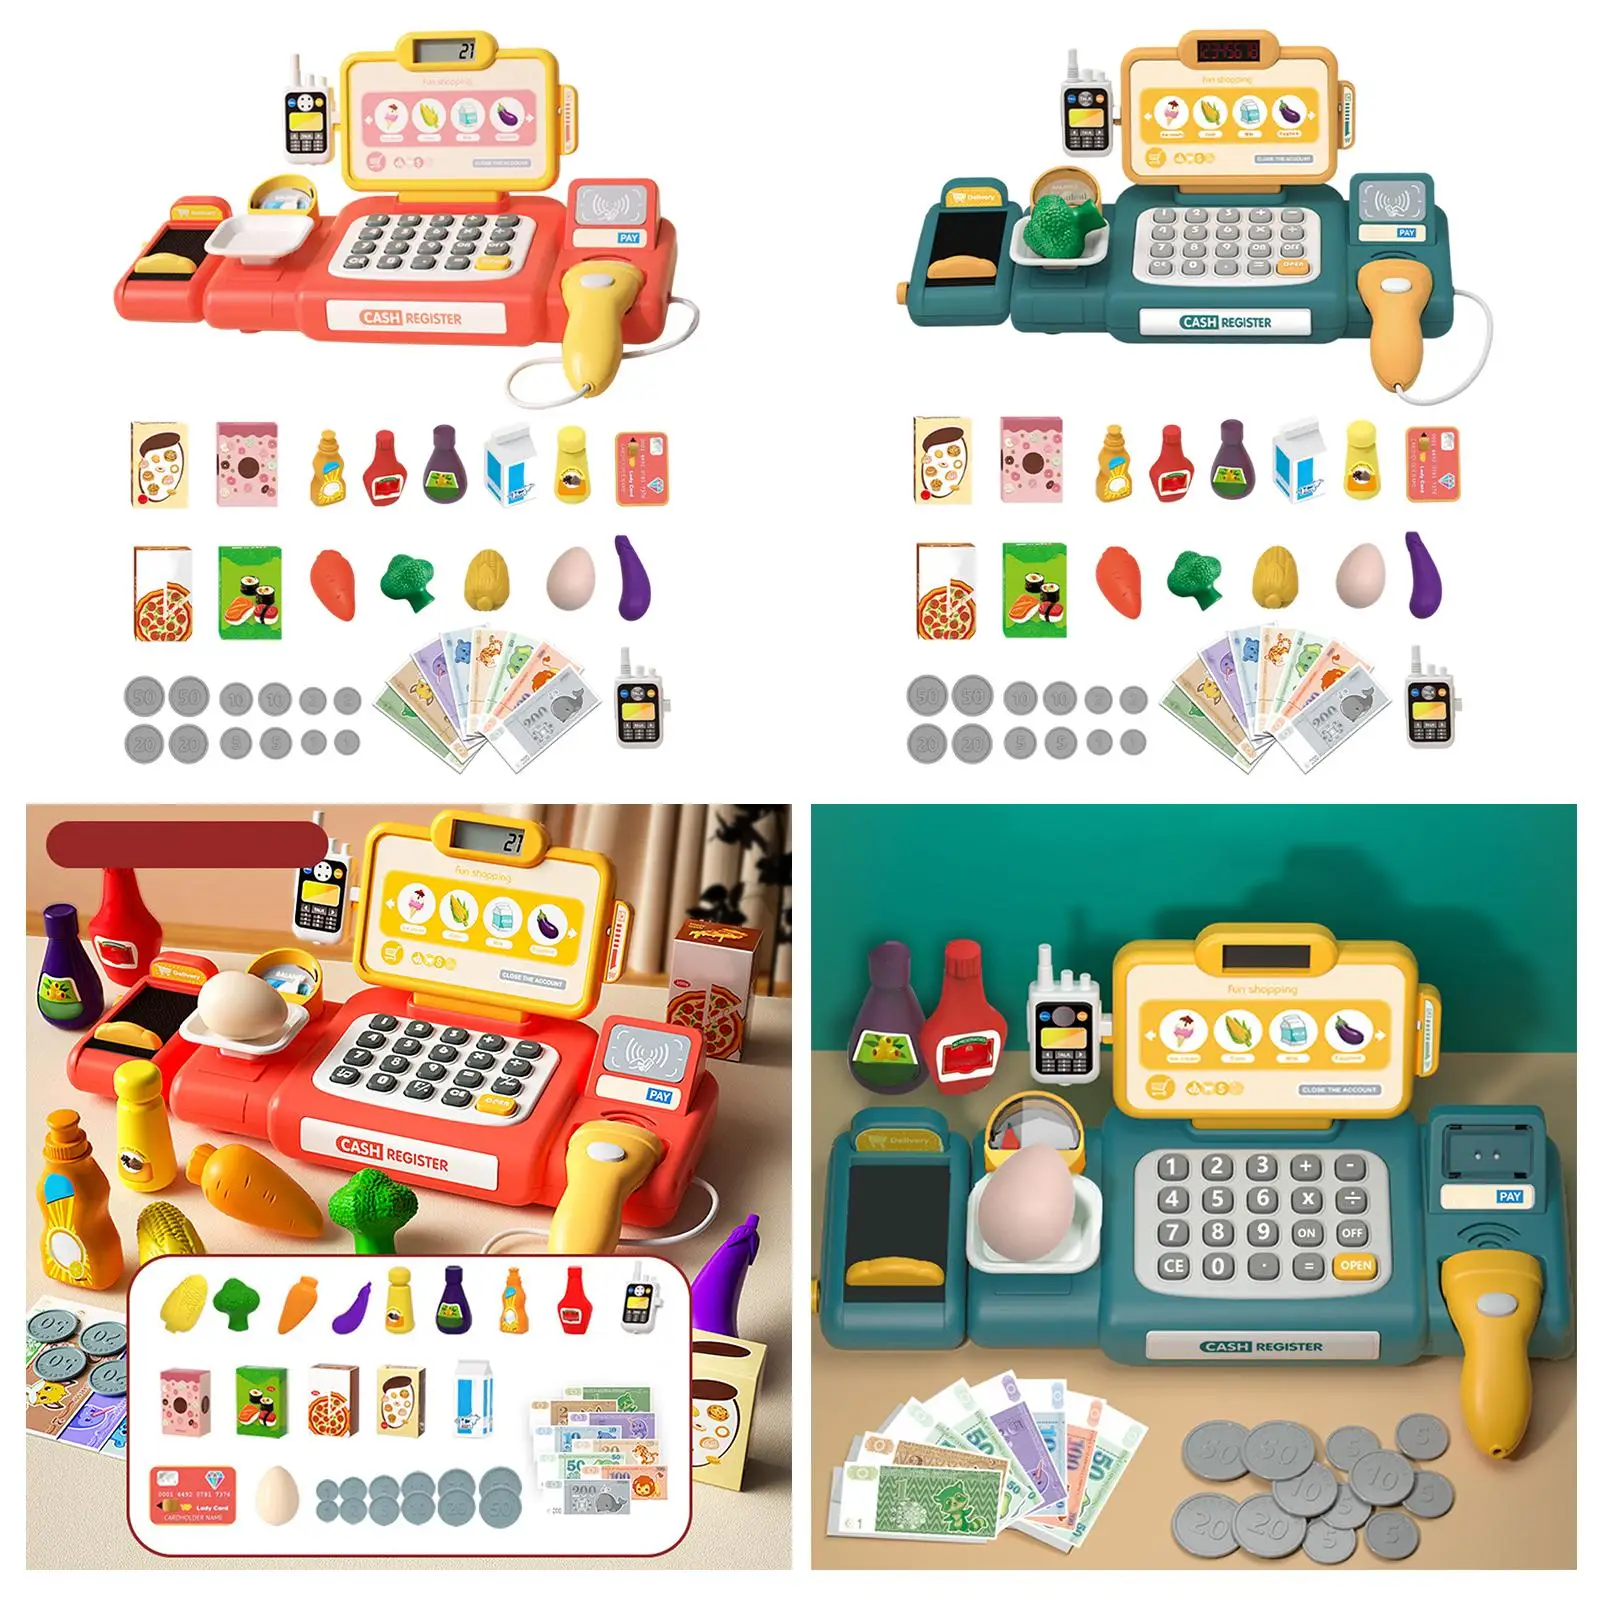 Supermarket Store Toys Cash Register Pretend Play Calculator Kids Pretend Supermarket Playset for Ages 3 4 5 6 7 Holiday Gifts